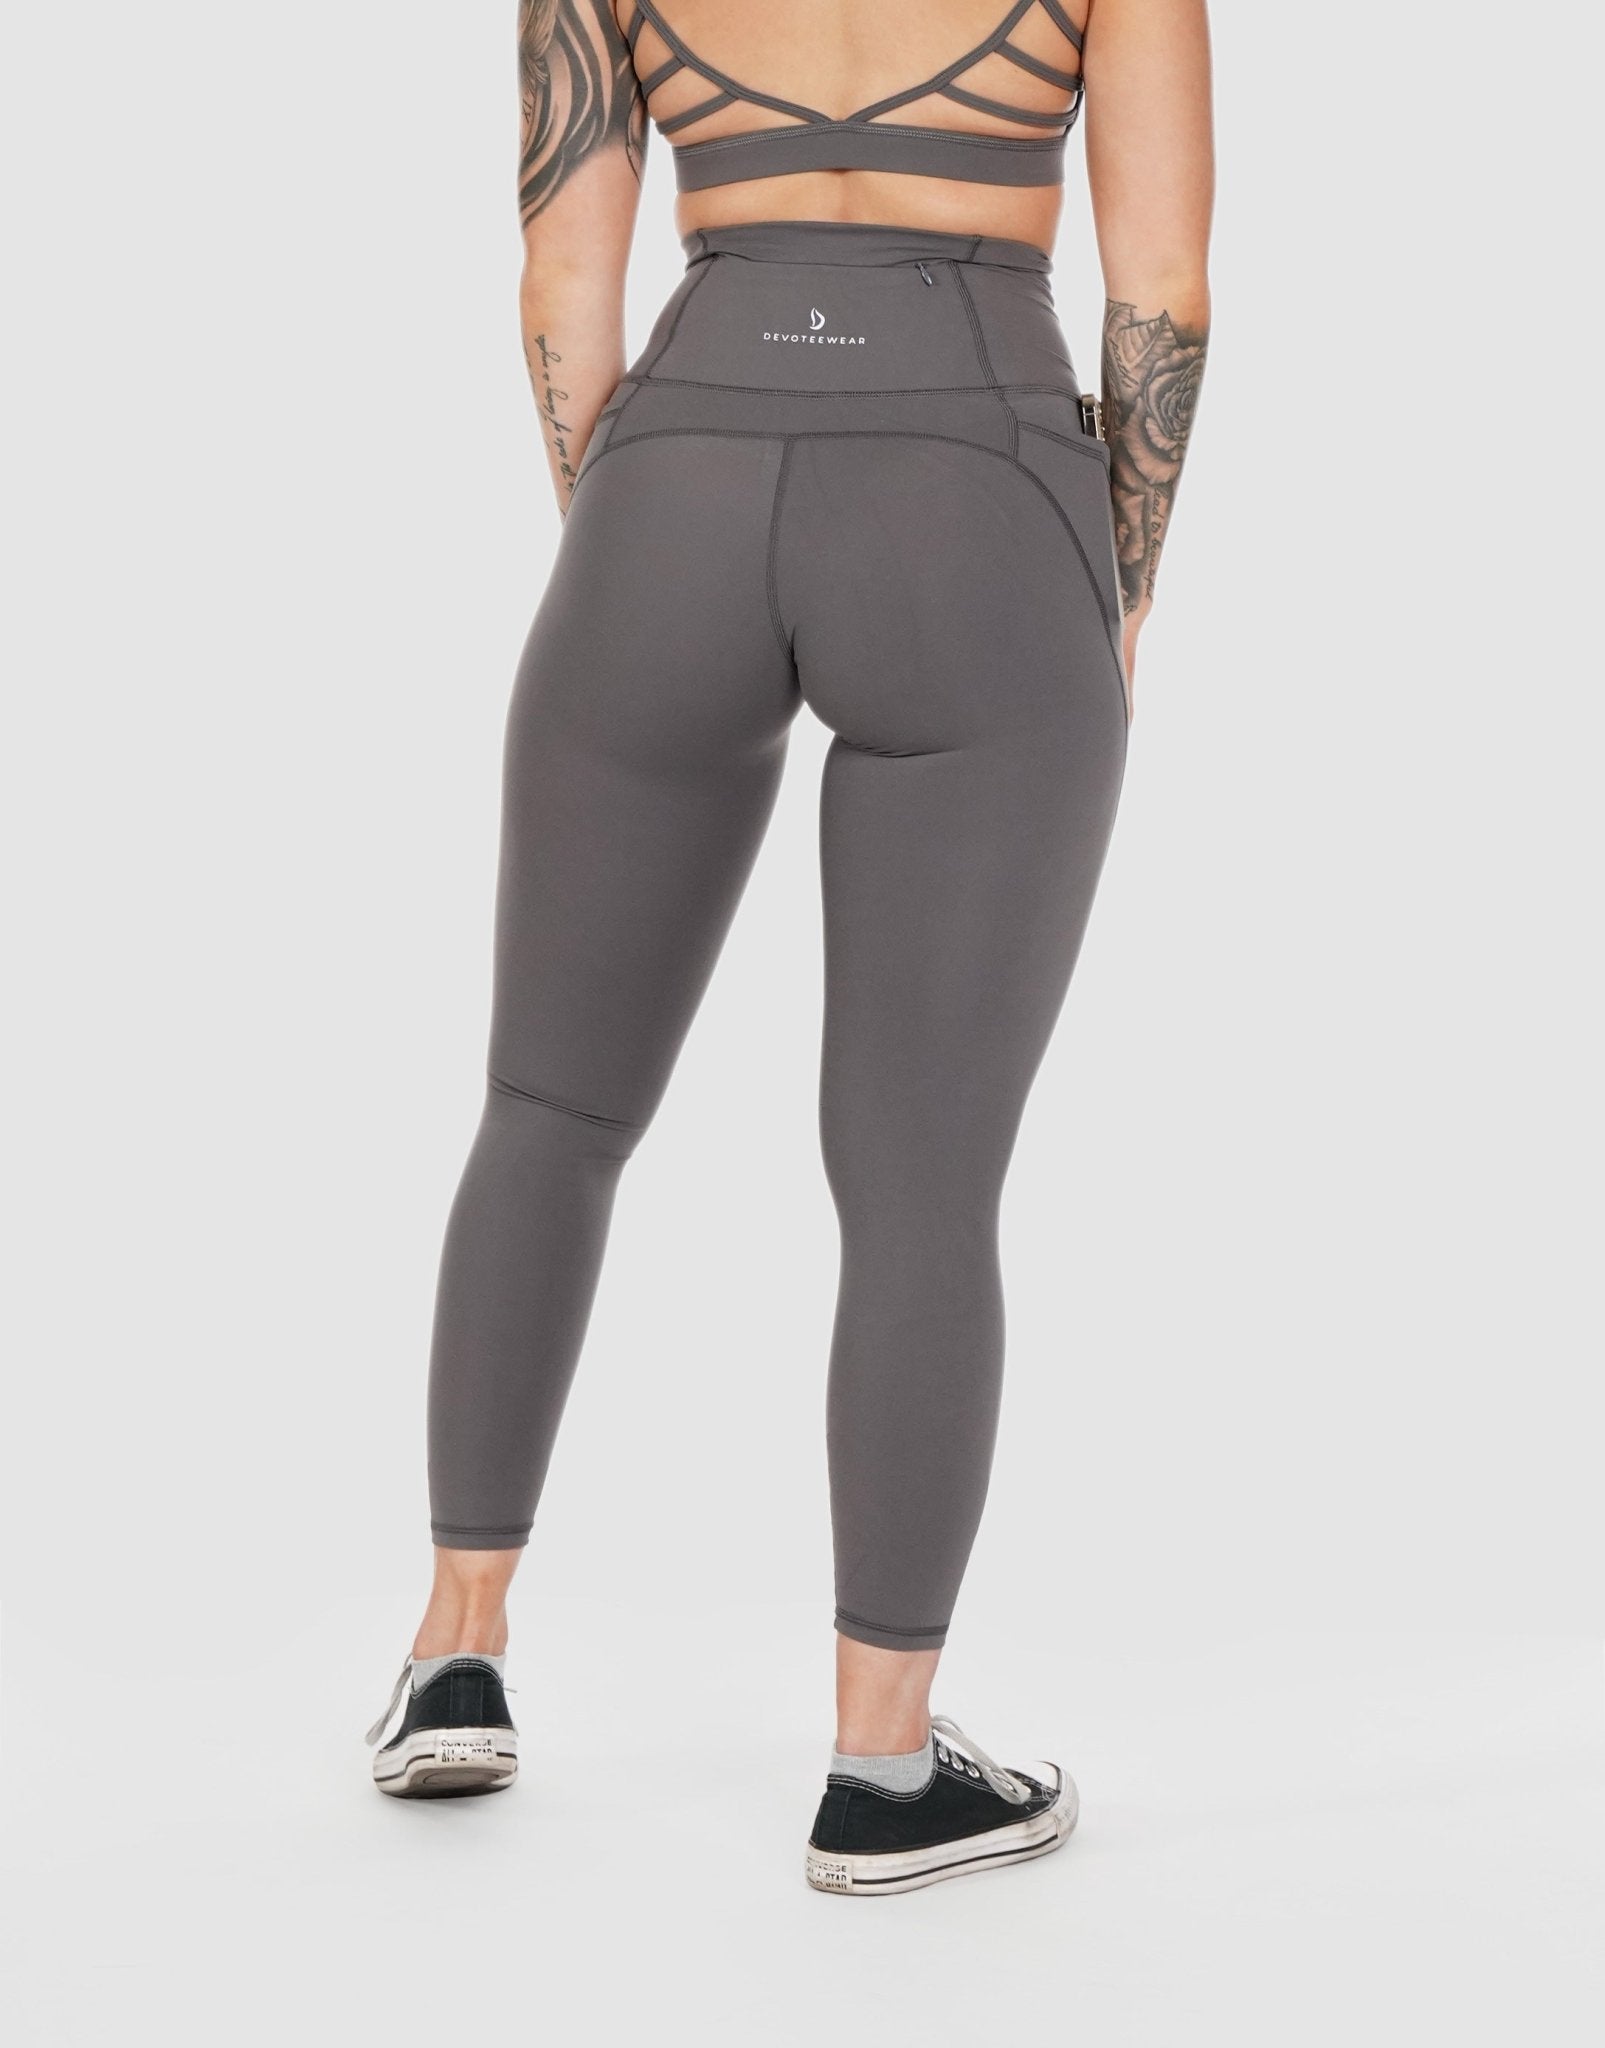 Daily Ritual Leggings Are Ideal for Everyday Wear and Have Pockets